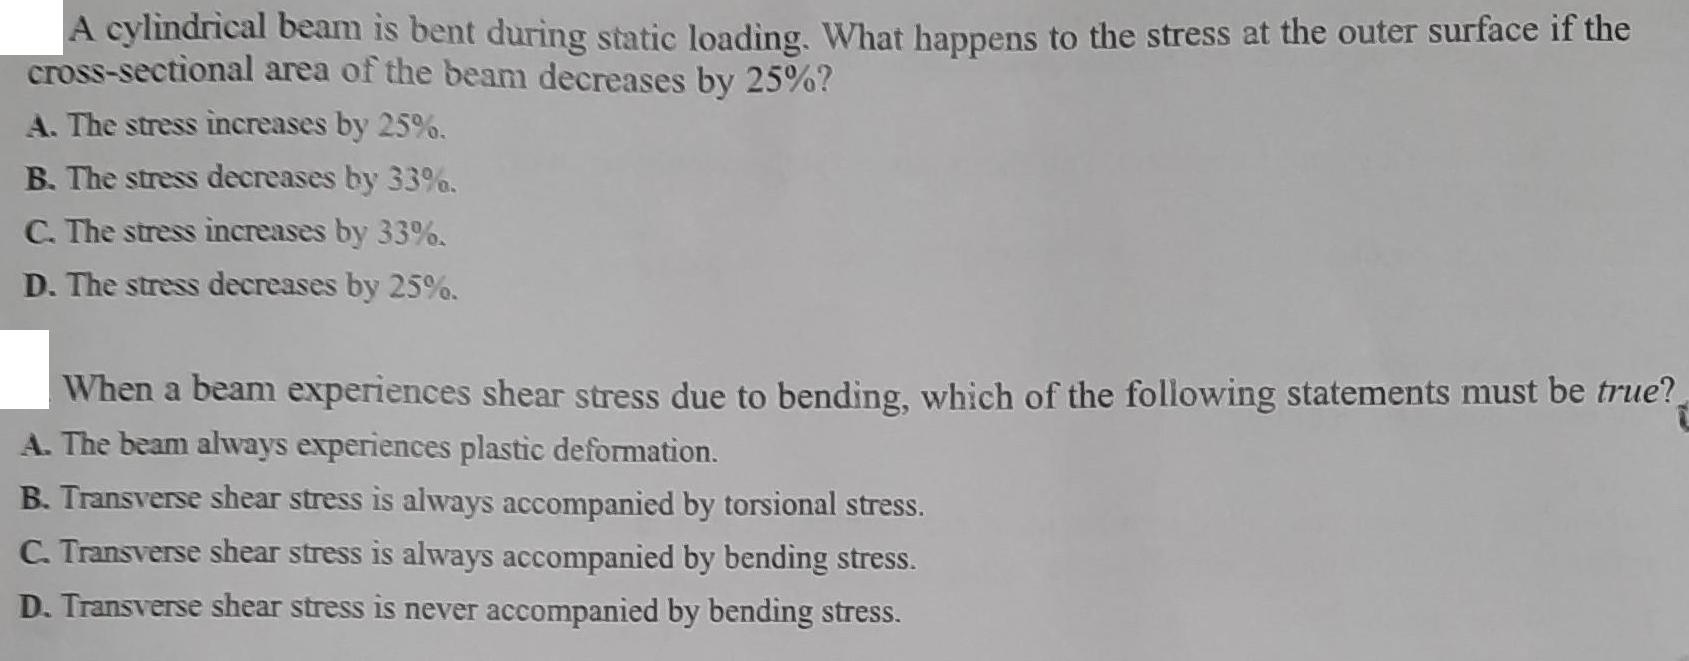 A cylindrical beam is bent during static loading. What happens to the stress at the outer surface if the